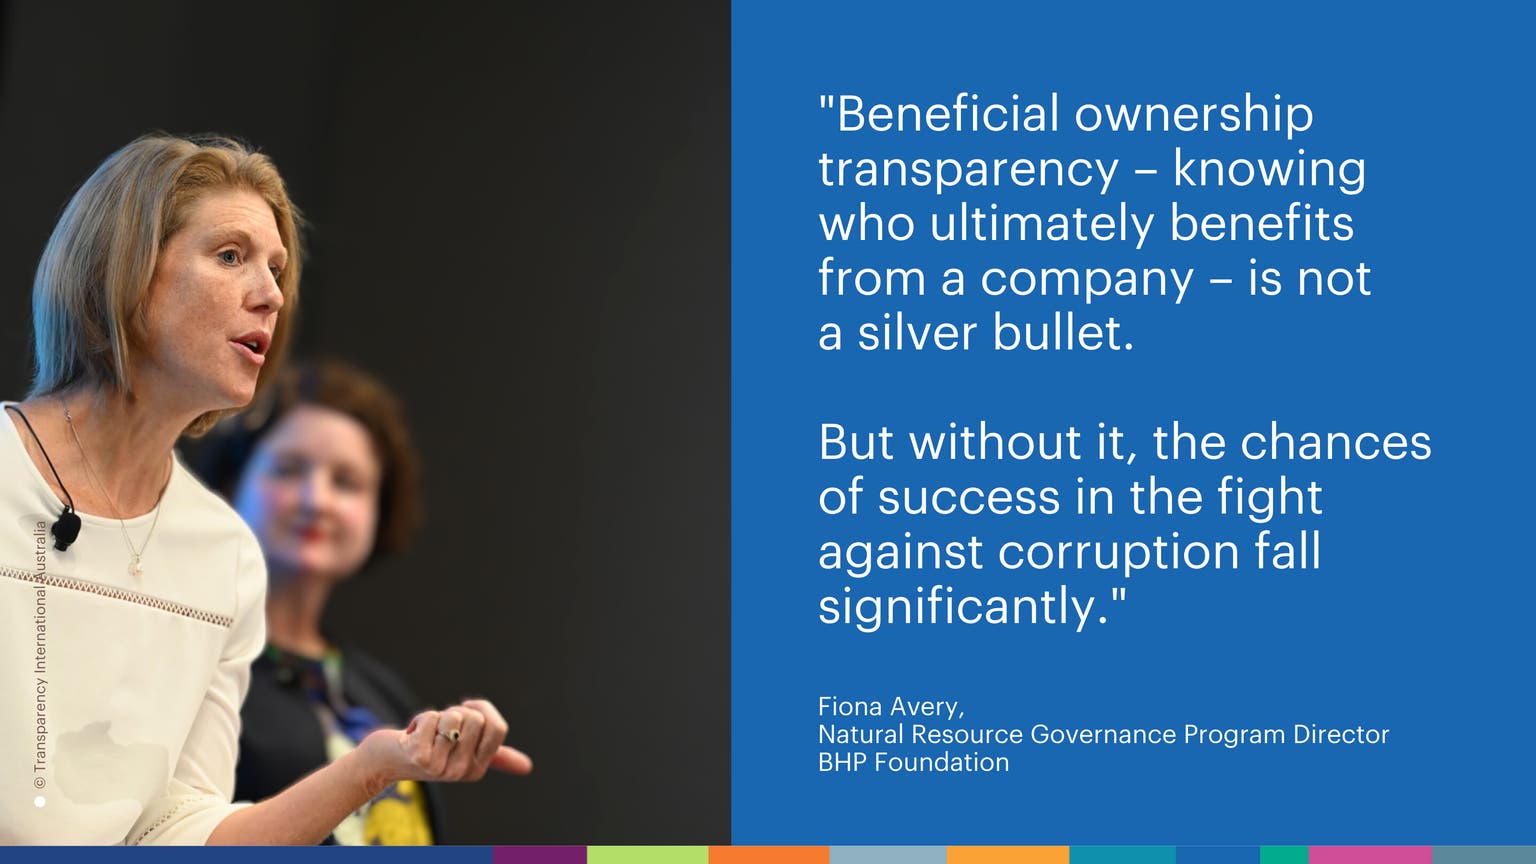 International_Transparency_AU_Summit_BHP_Foundation_Natural_Resource_Governance_Fiona_Avery.png